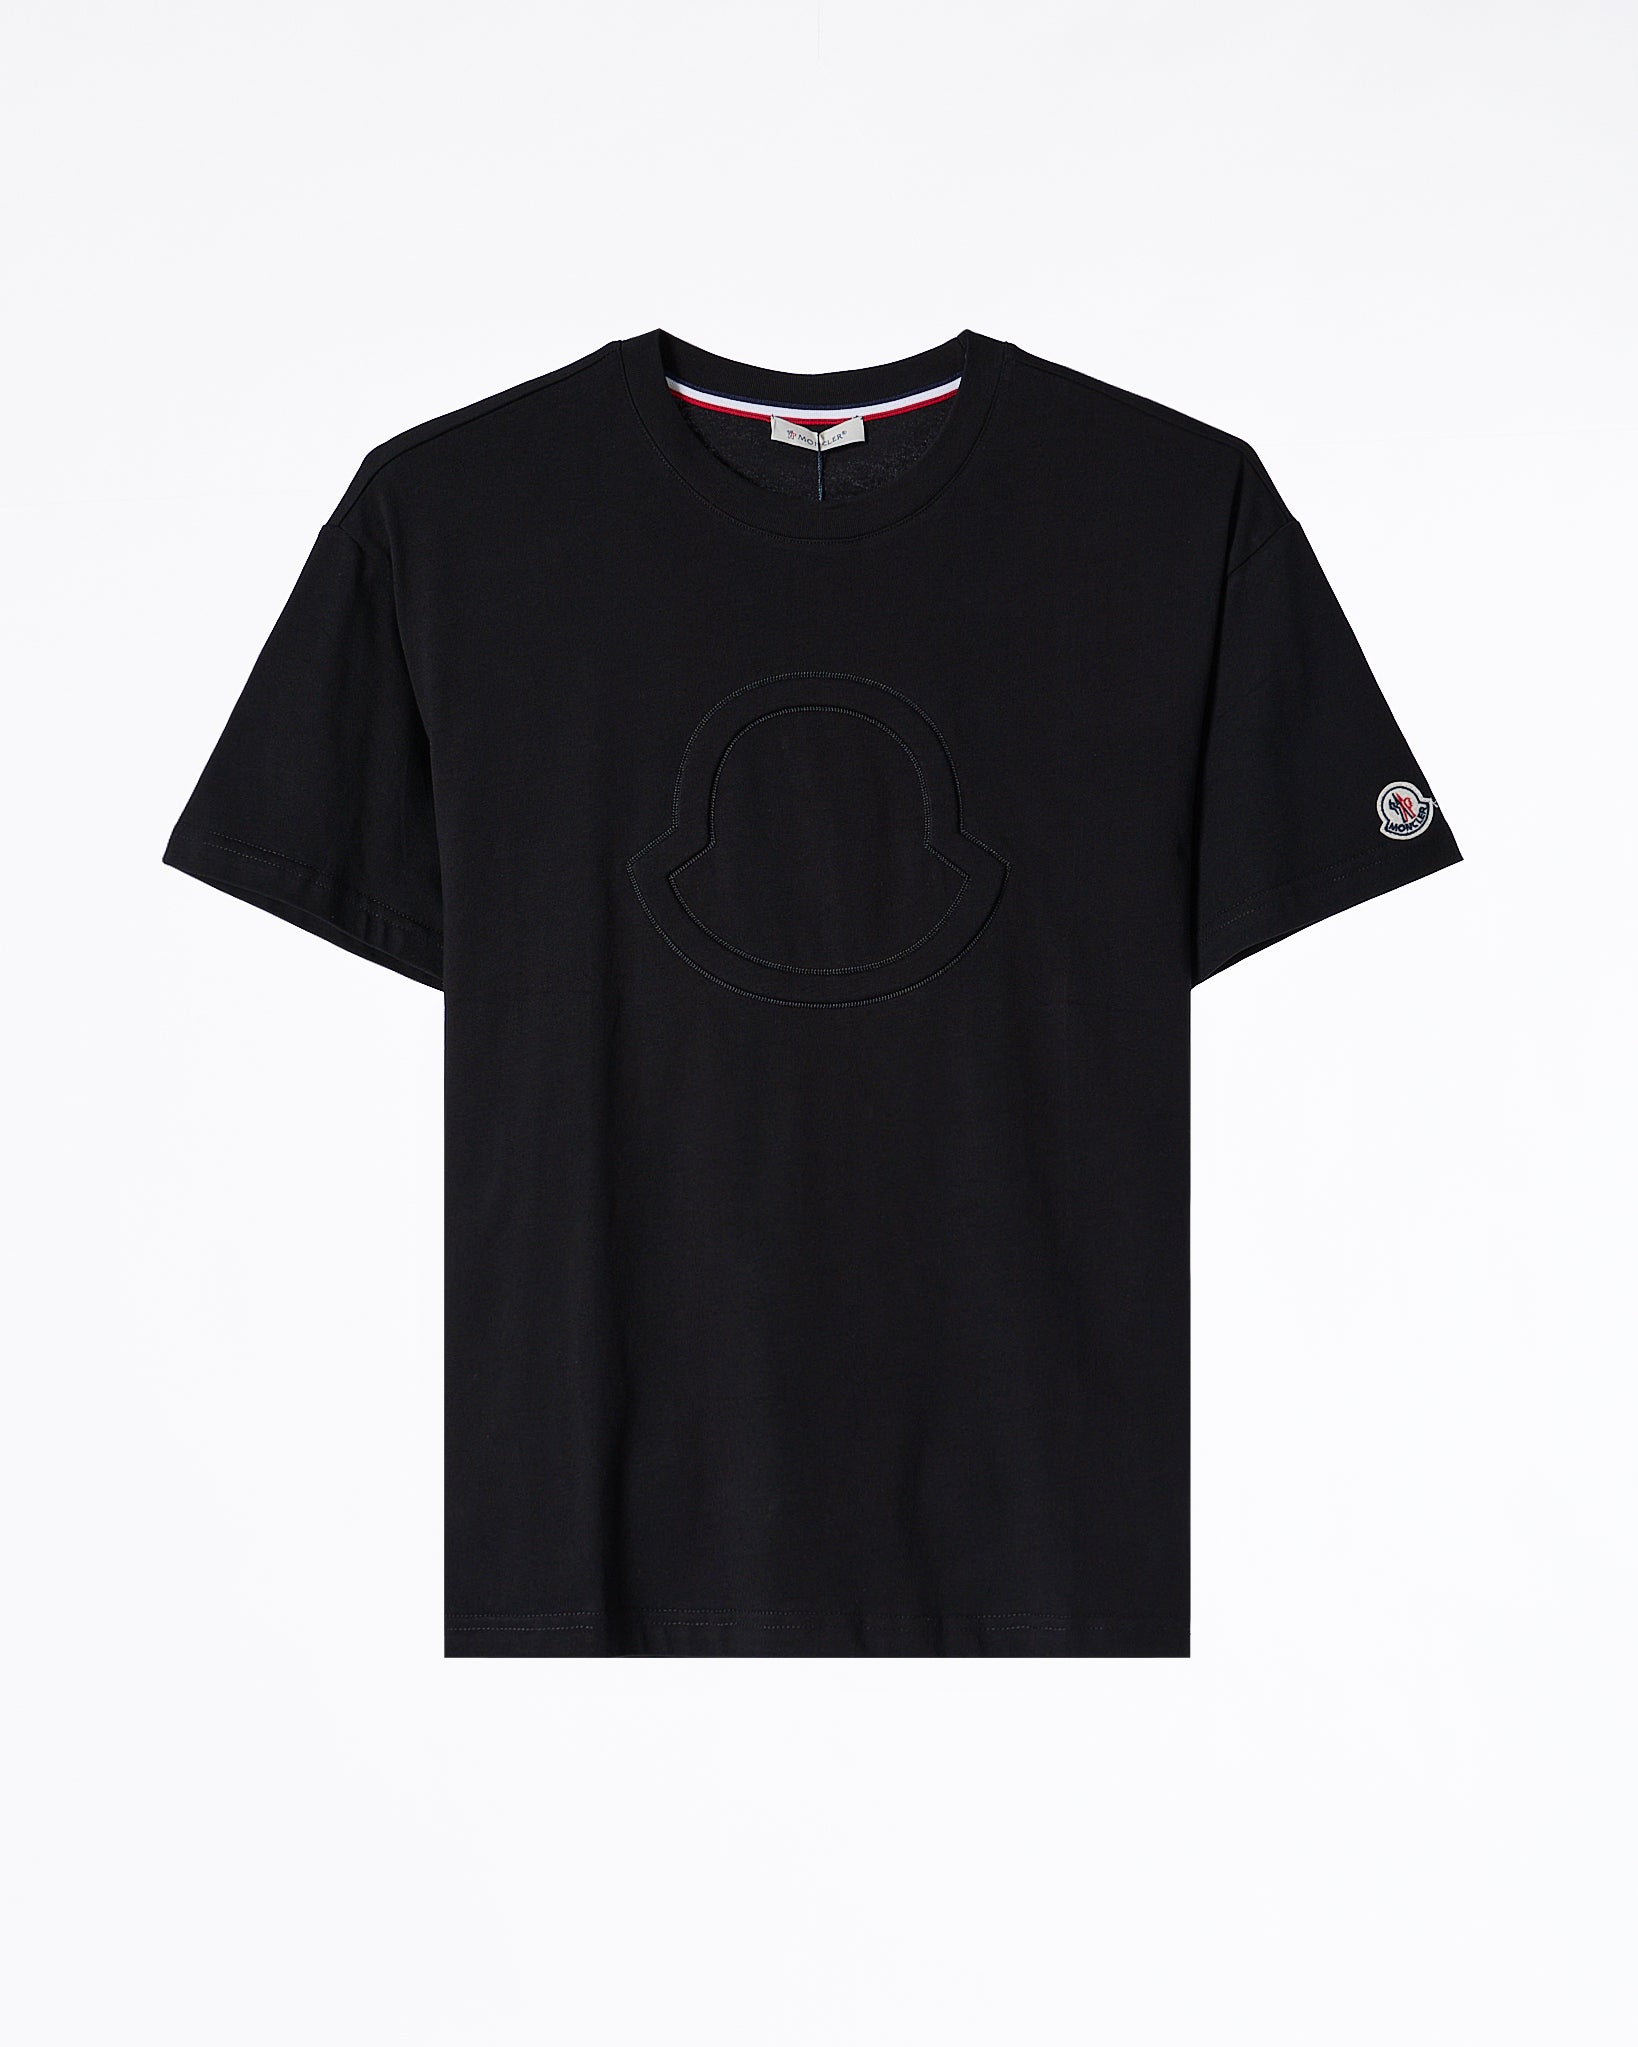 MOI OUTFIT-MC Embroidered Men T-Shirt 53.90